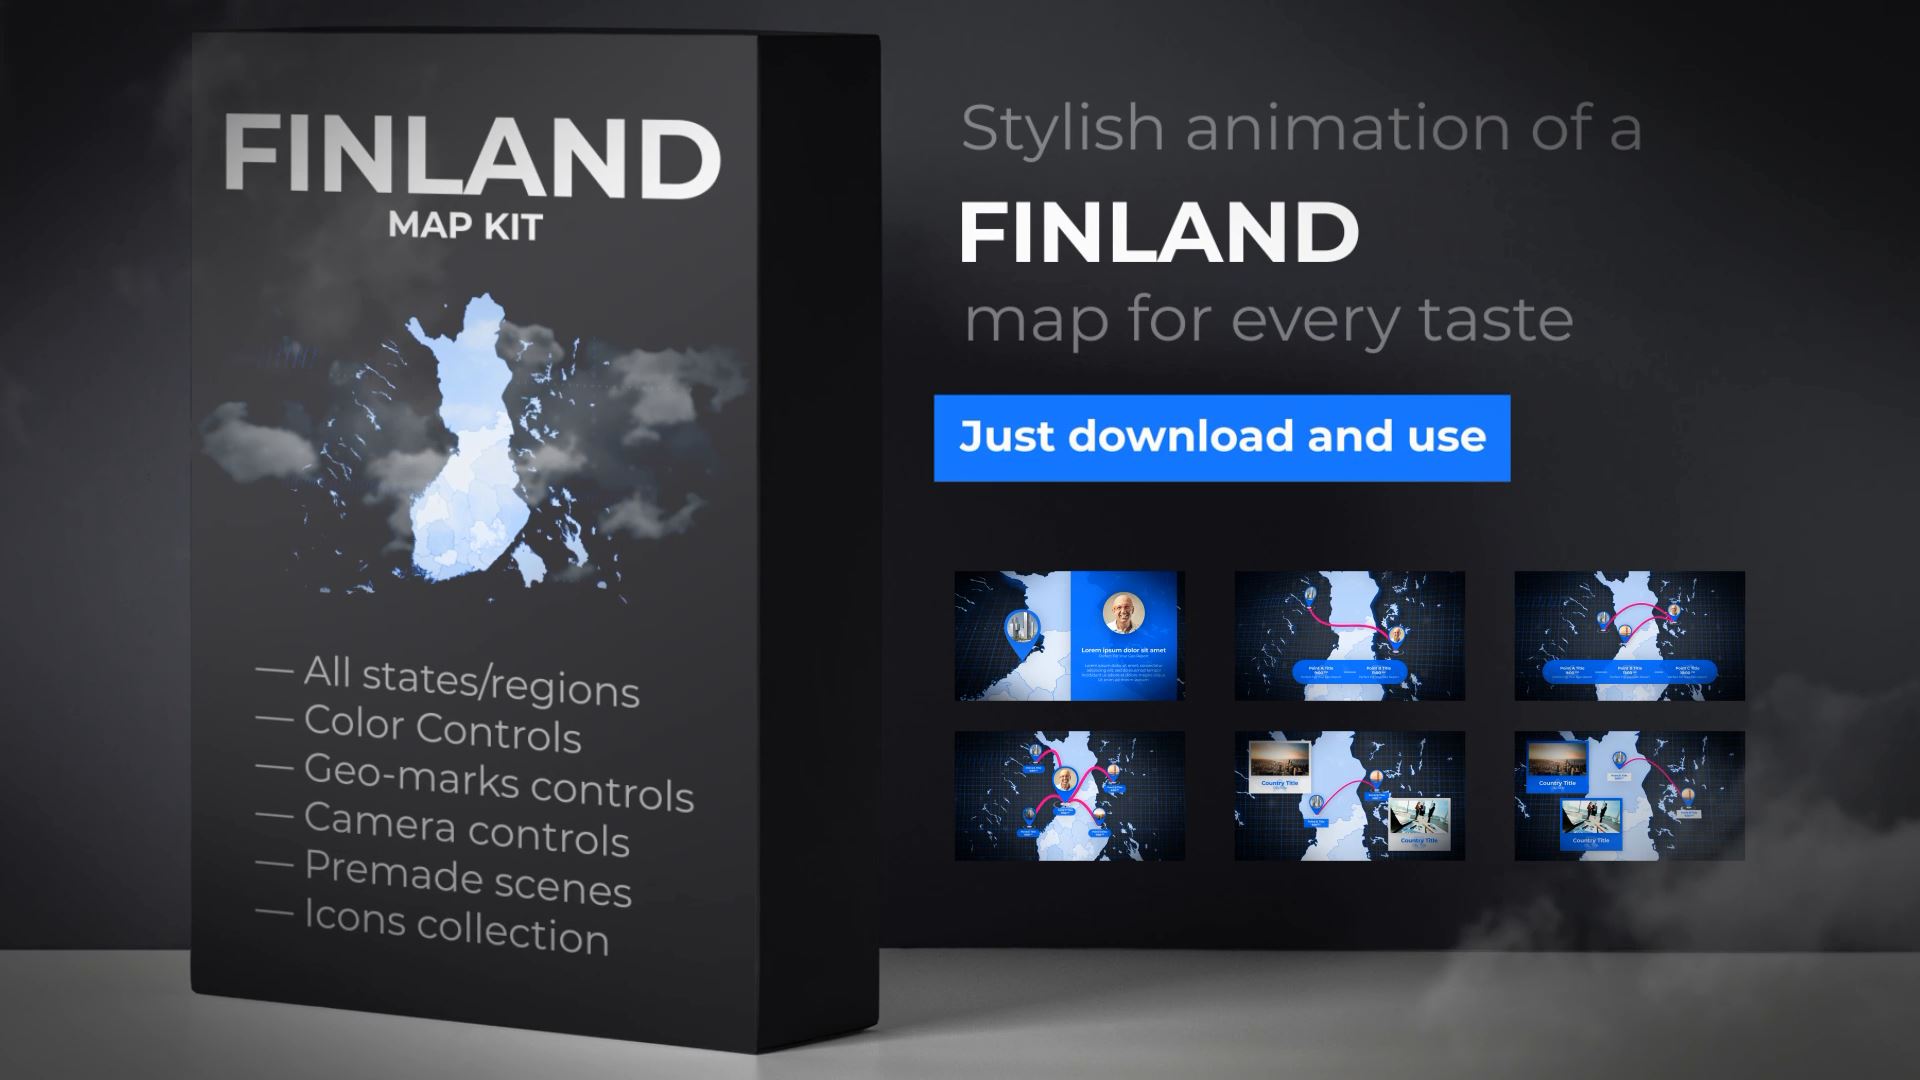  Finland Map - Republic of Finland Map Kit 